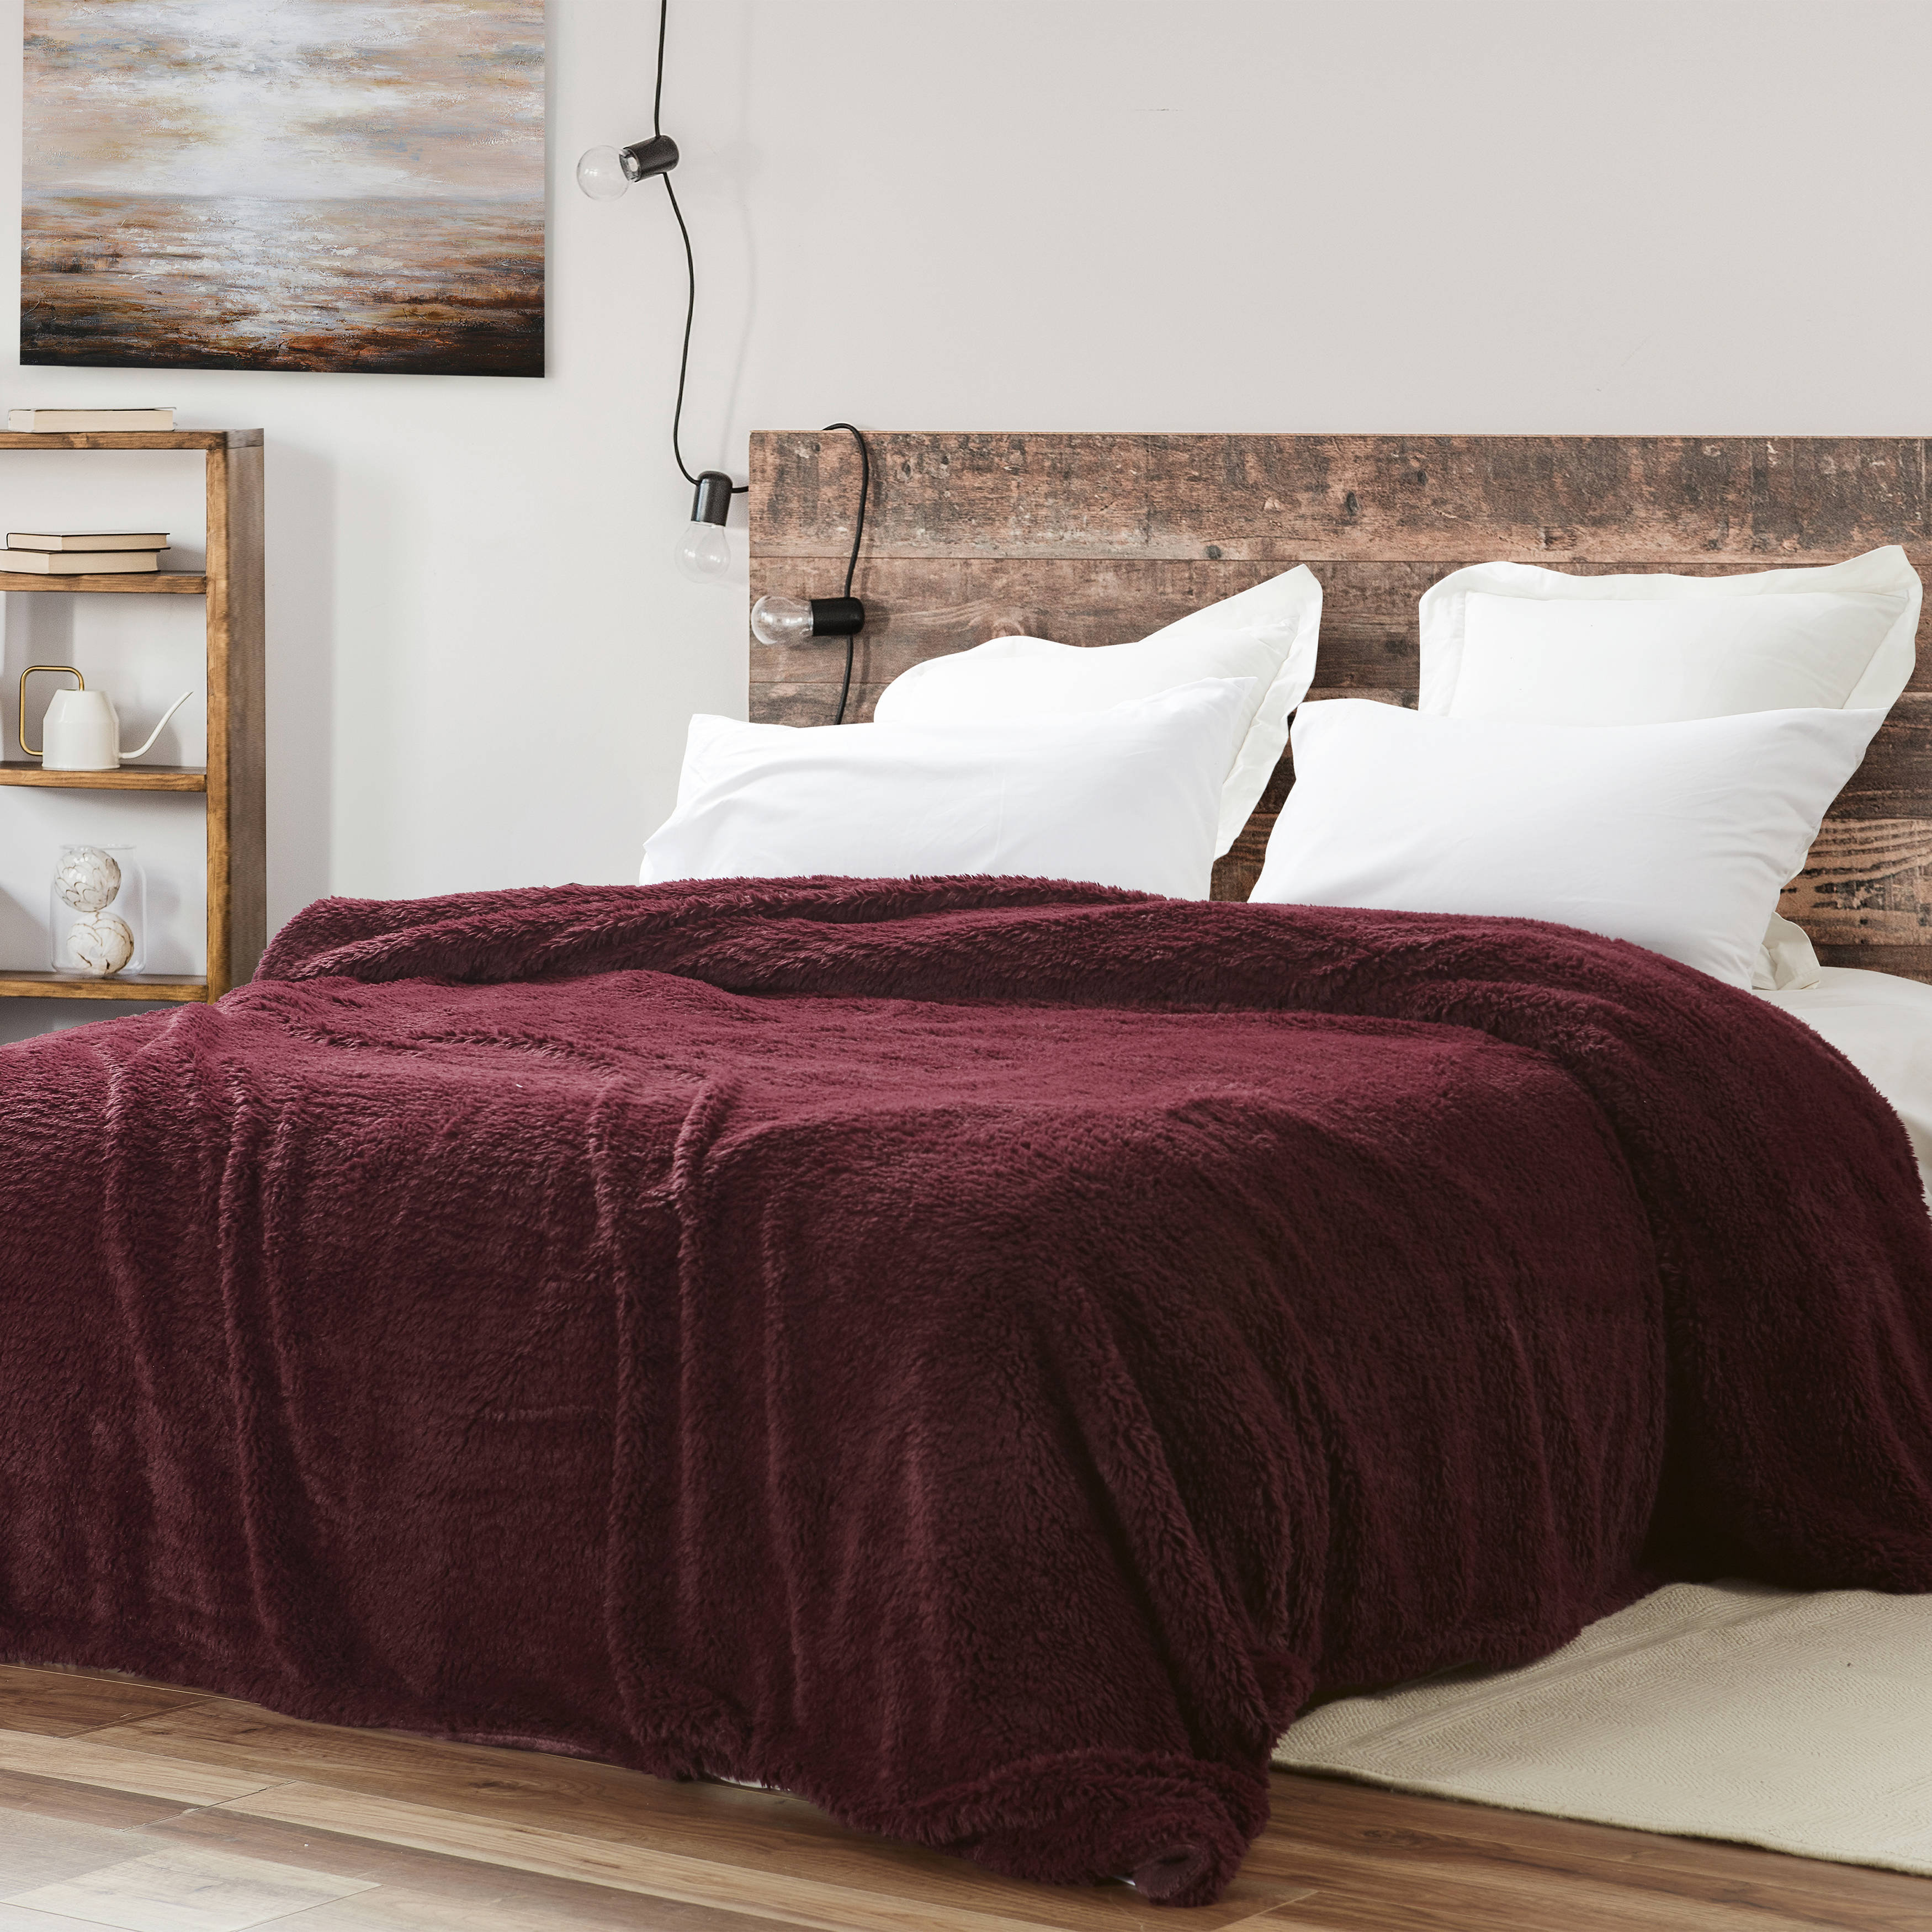 Puts This To Sleep - Coma Inducer® King Blanket - Burgundy